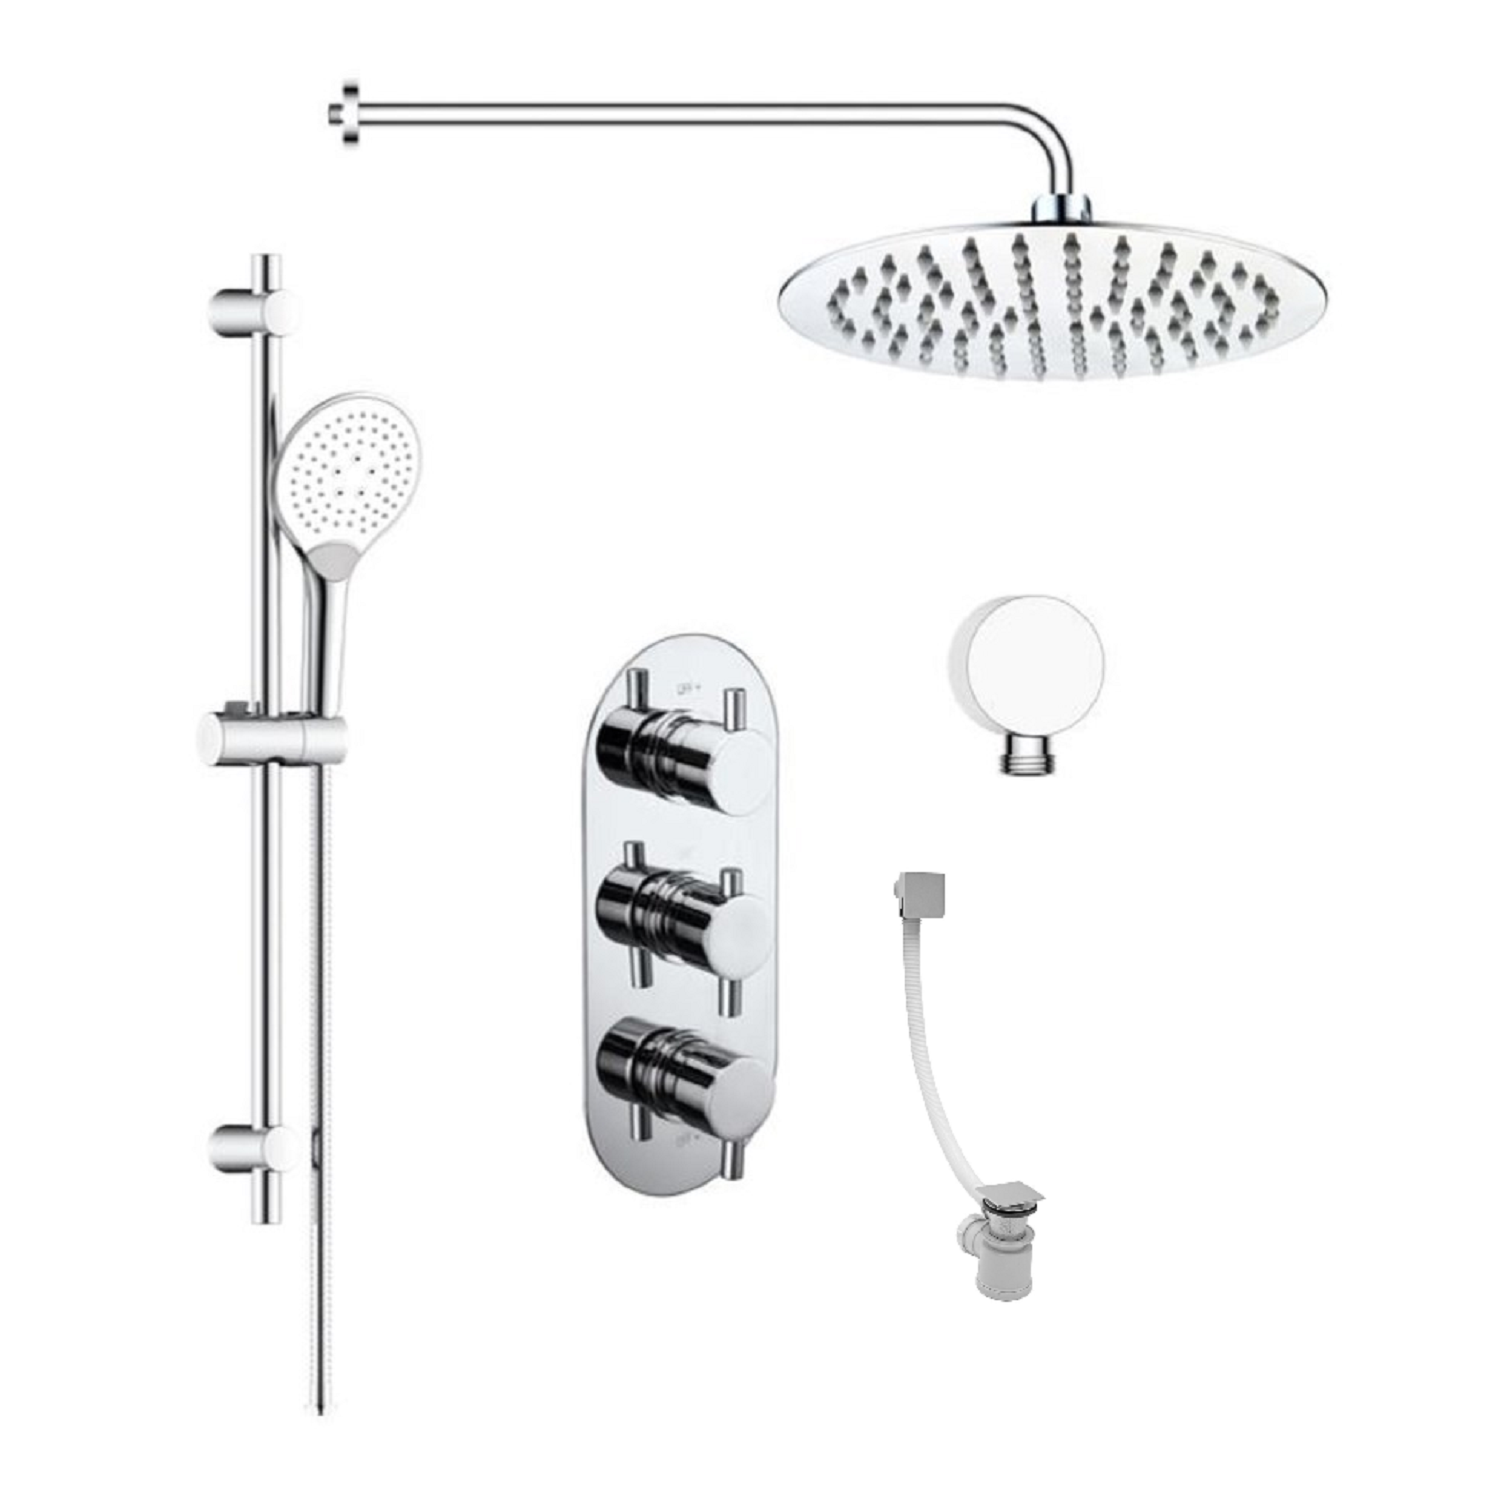 Triple Outlet Concealed Thermostatic Mixer Slim Rain Shower and Bath Filler - Flow